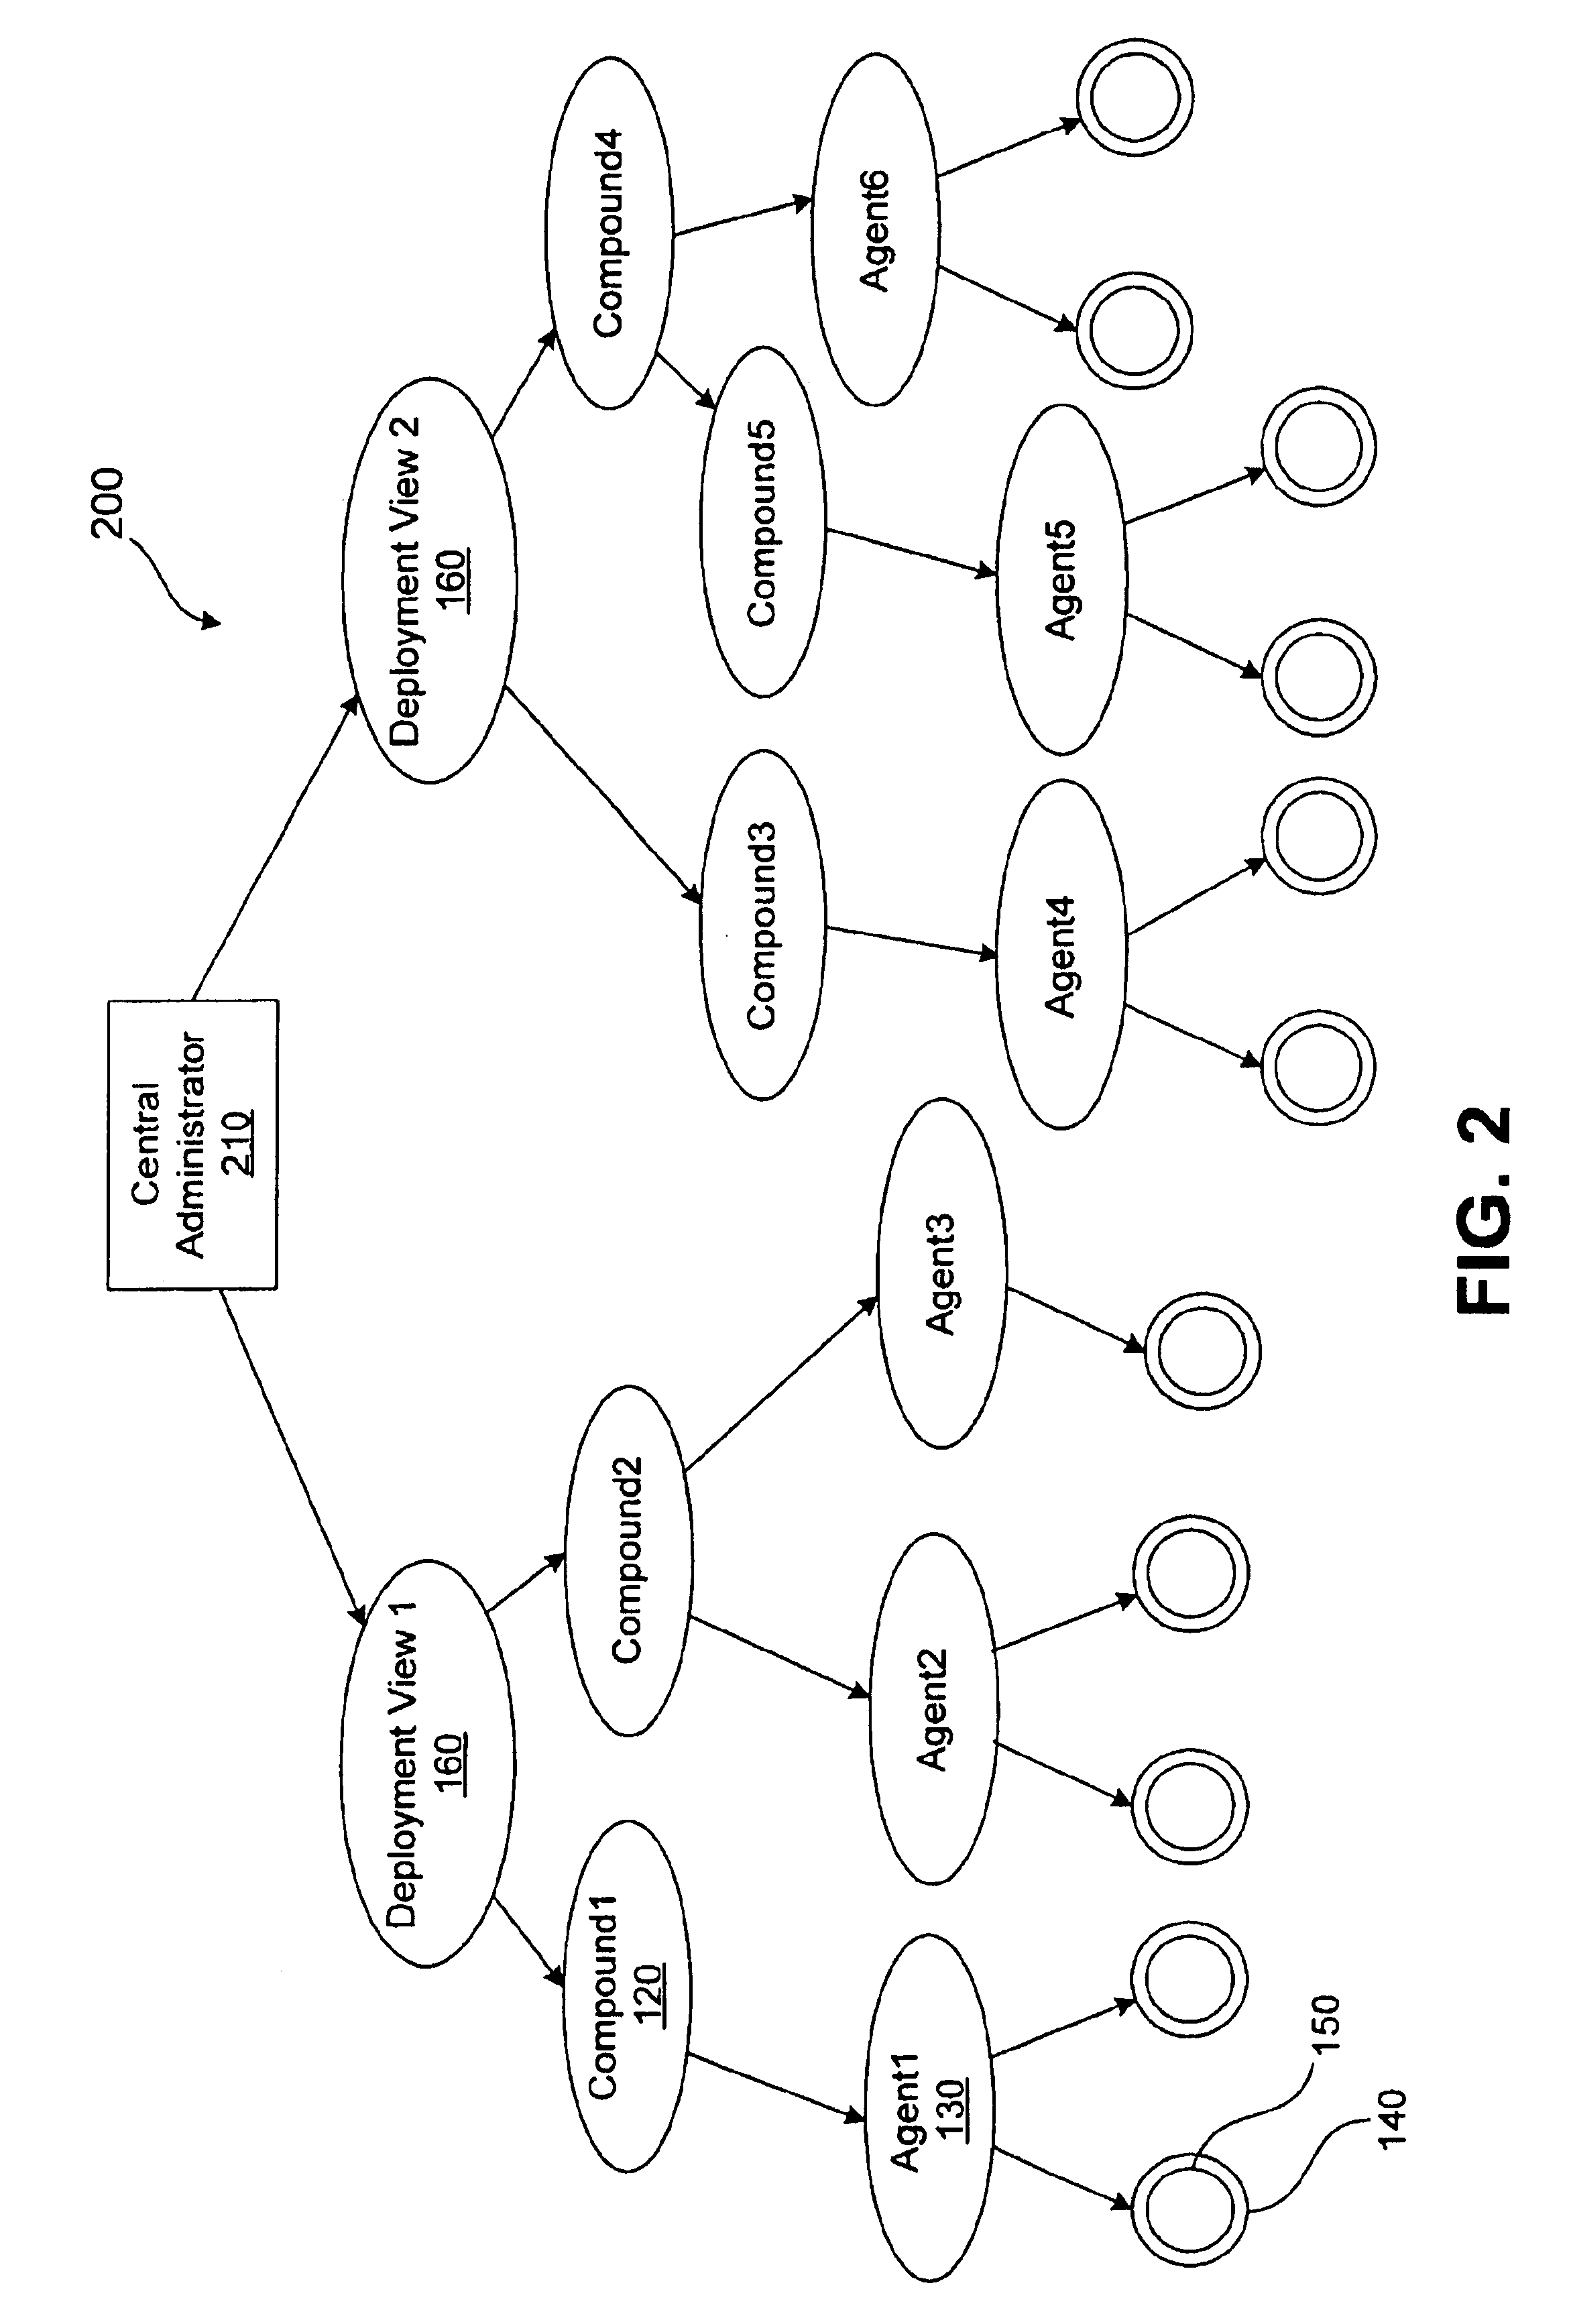 Method of administering software components using asynchronous messaging in a multi-platform, multi-programming language environment